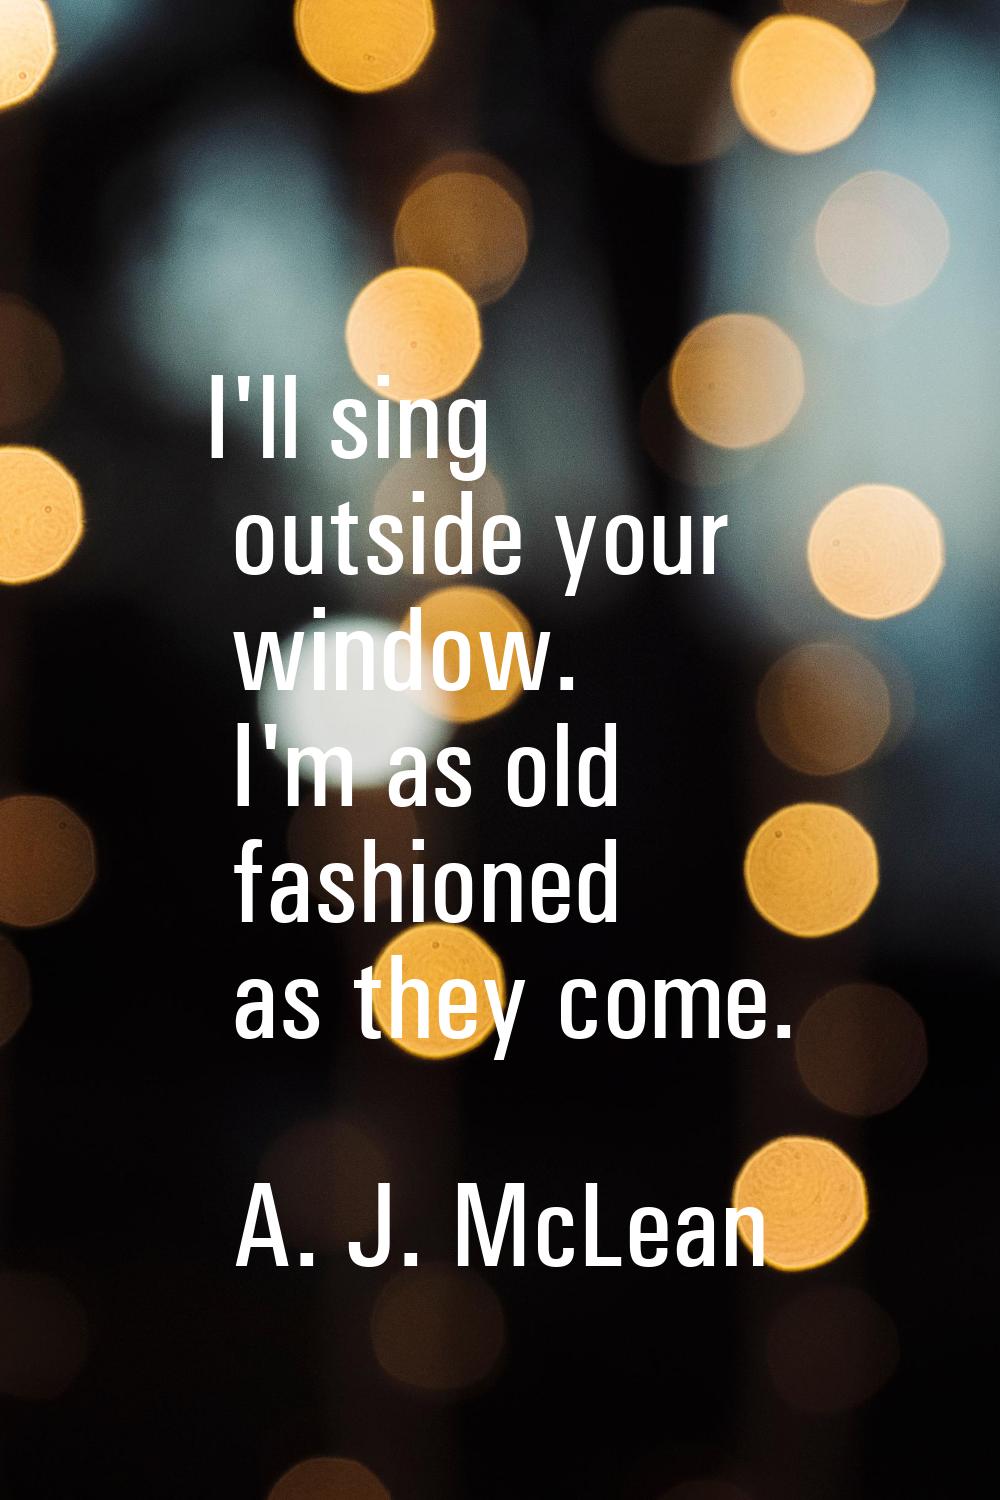 I'll sing outside your window. I'm as old fashioned as they come.